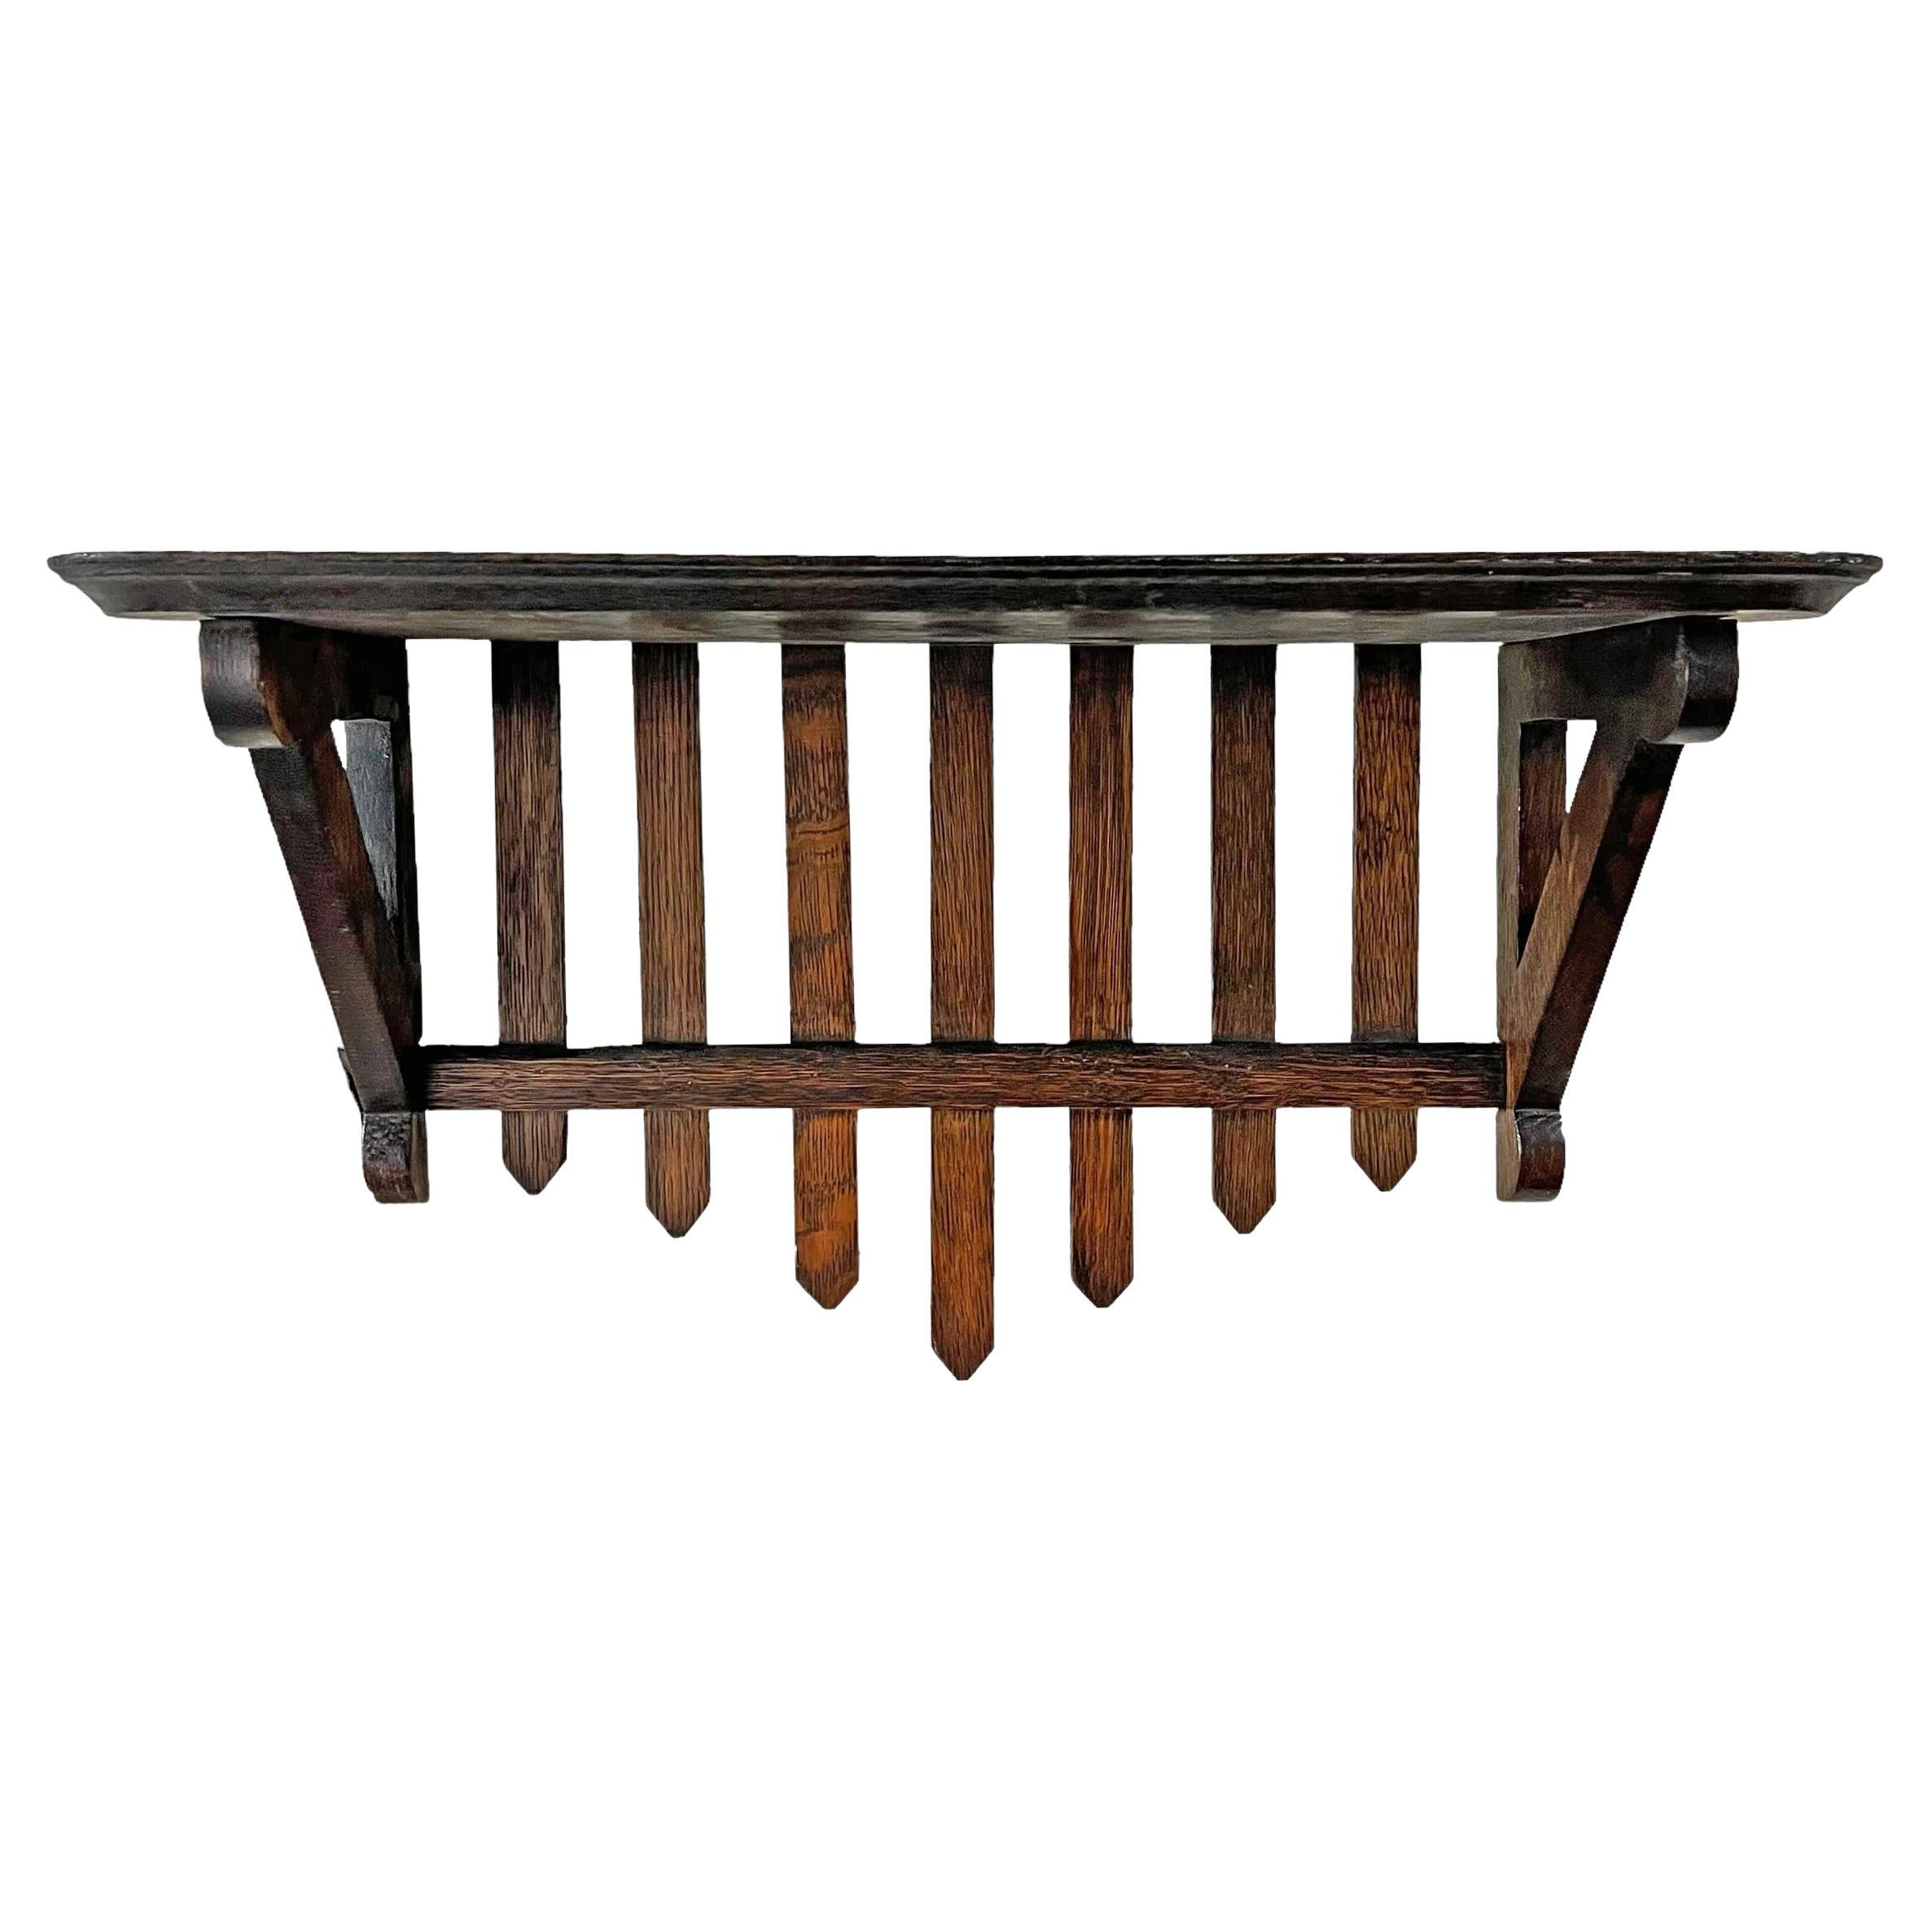 Early 20th Century American Picket Fence Wall Shelf